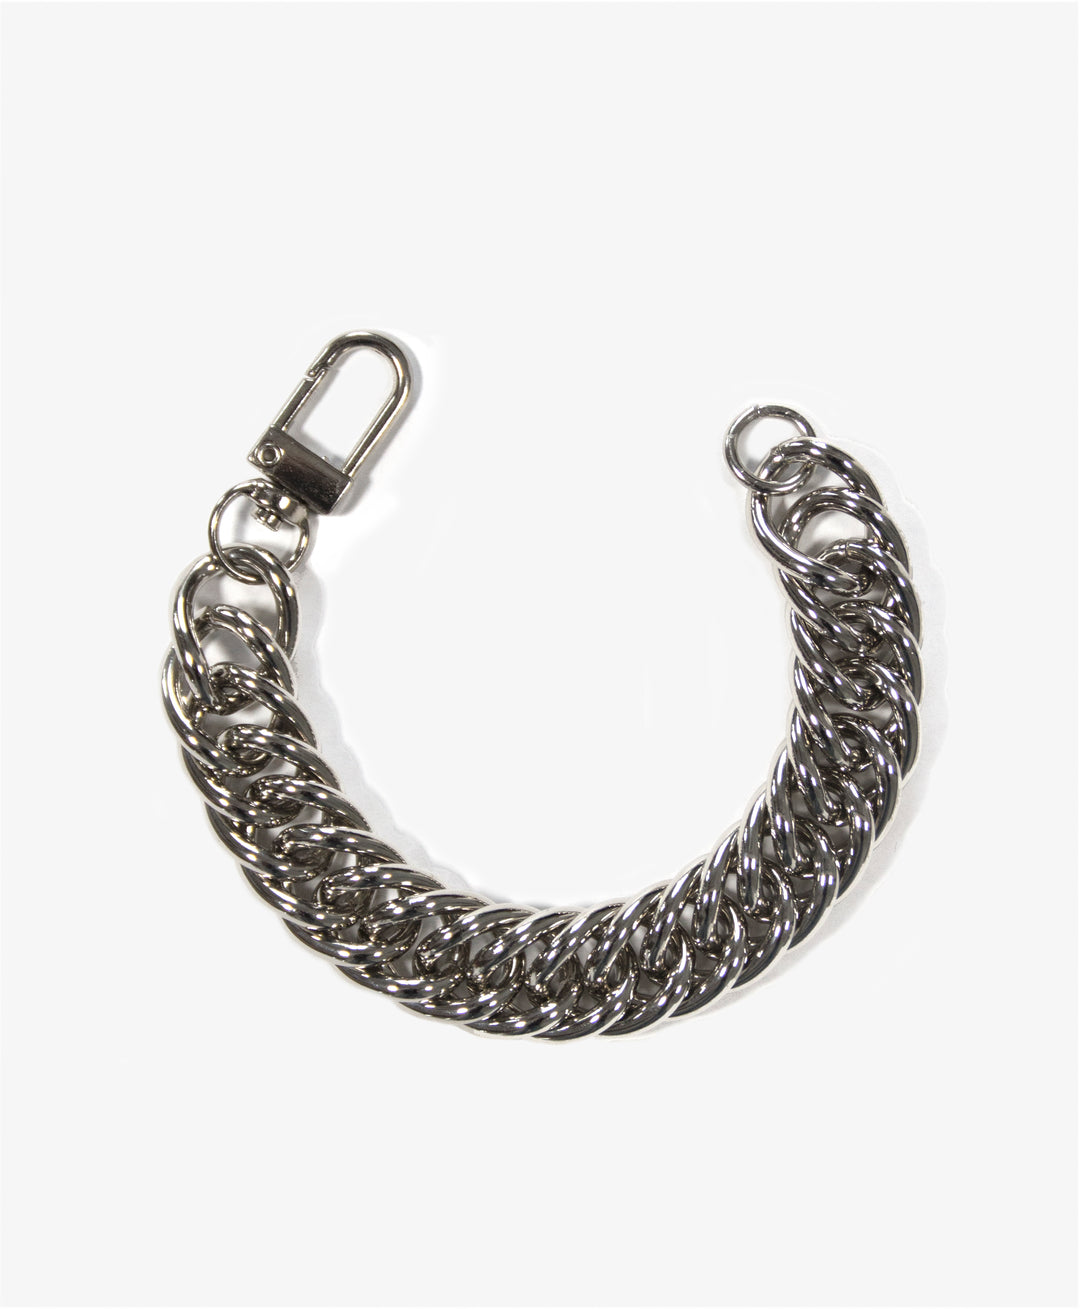 llayers-mens-women-jewelry-silver-stainlesssteel-chain-bracelet-unchained-002-New-York-4